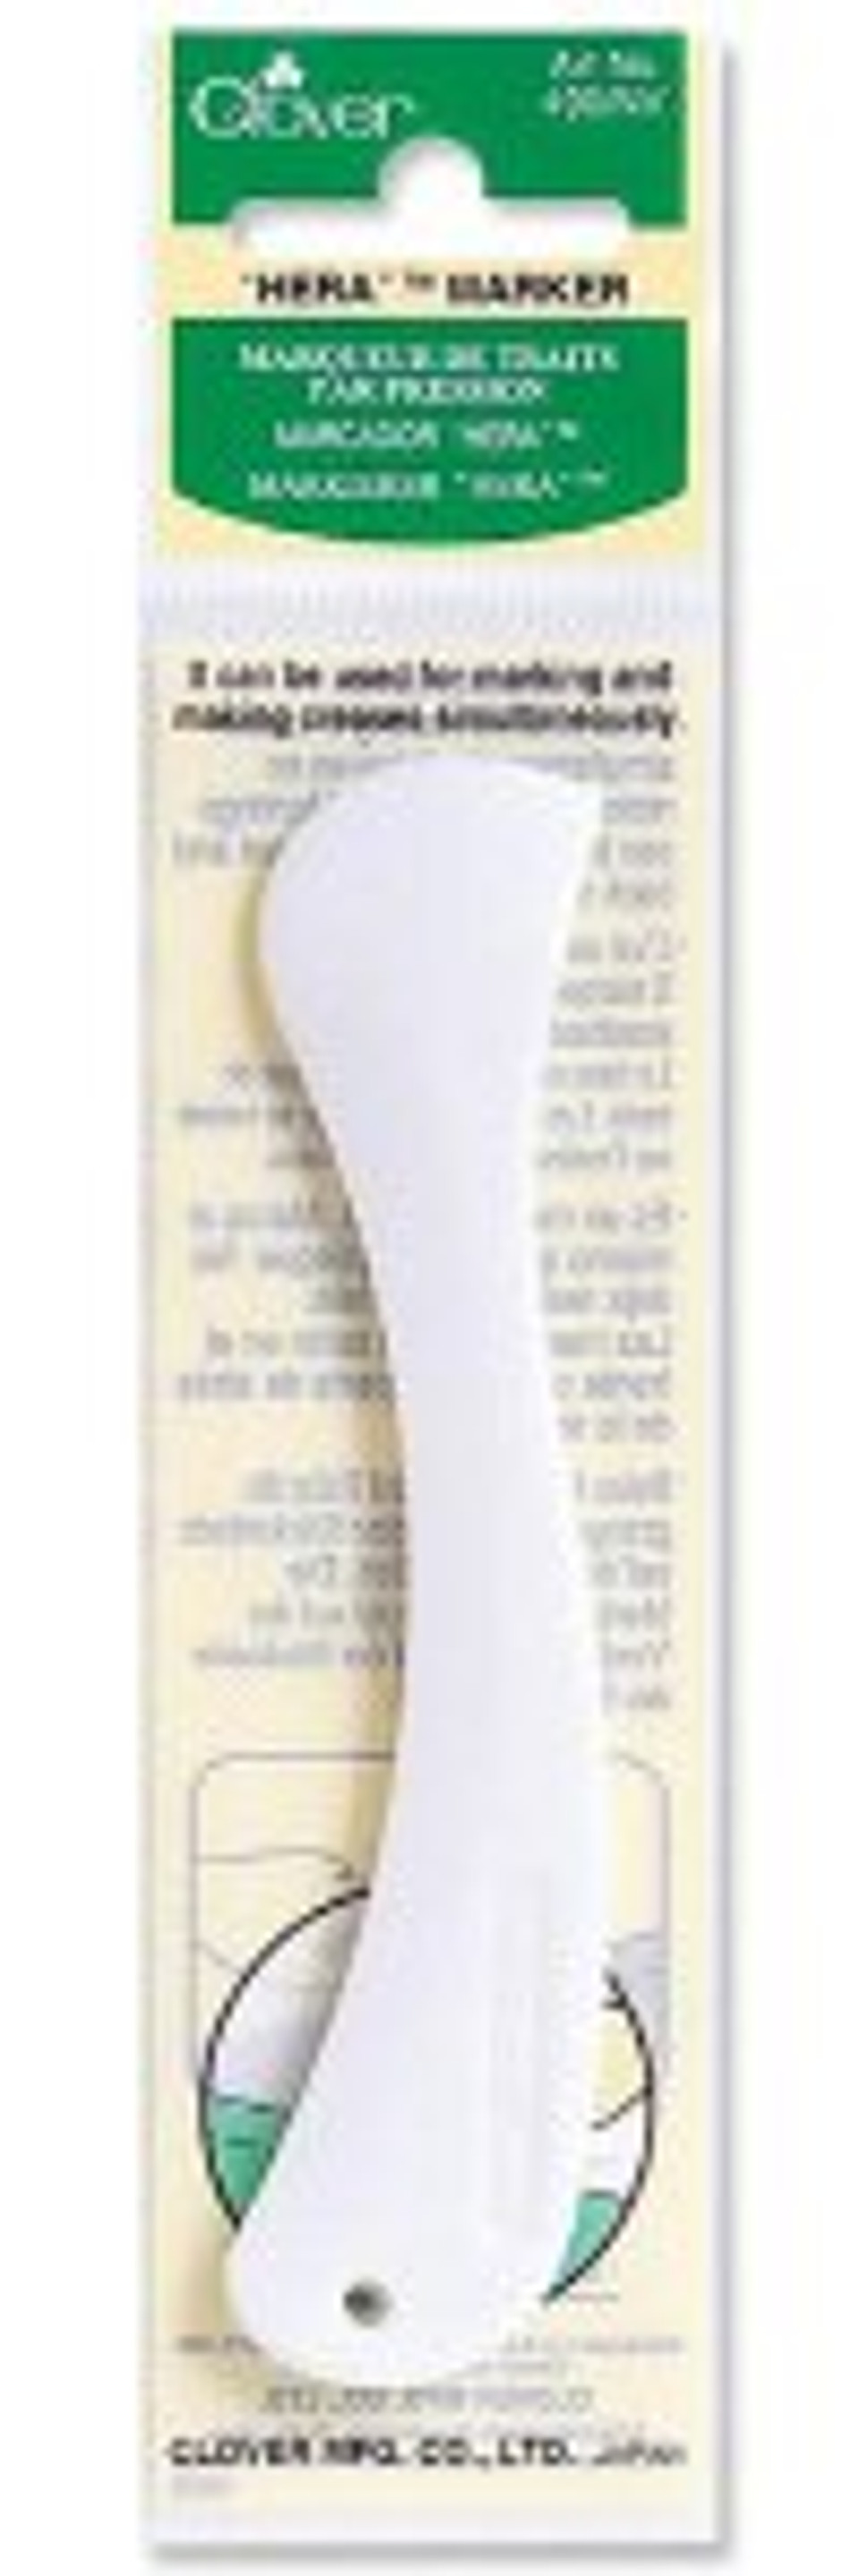 Hera marker quilting and sewing fabric marking tool - Broadway Fabrics